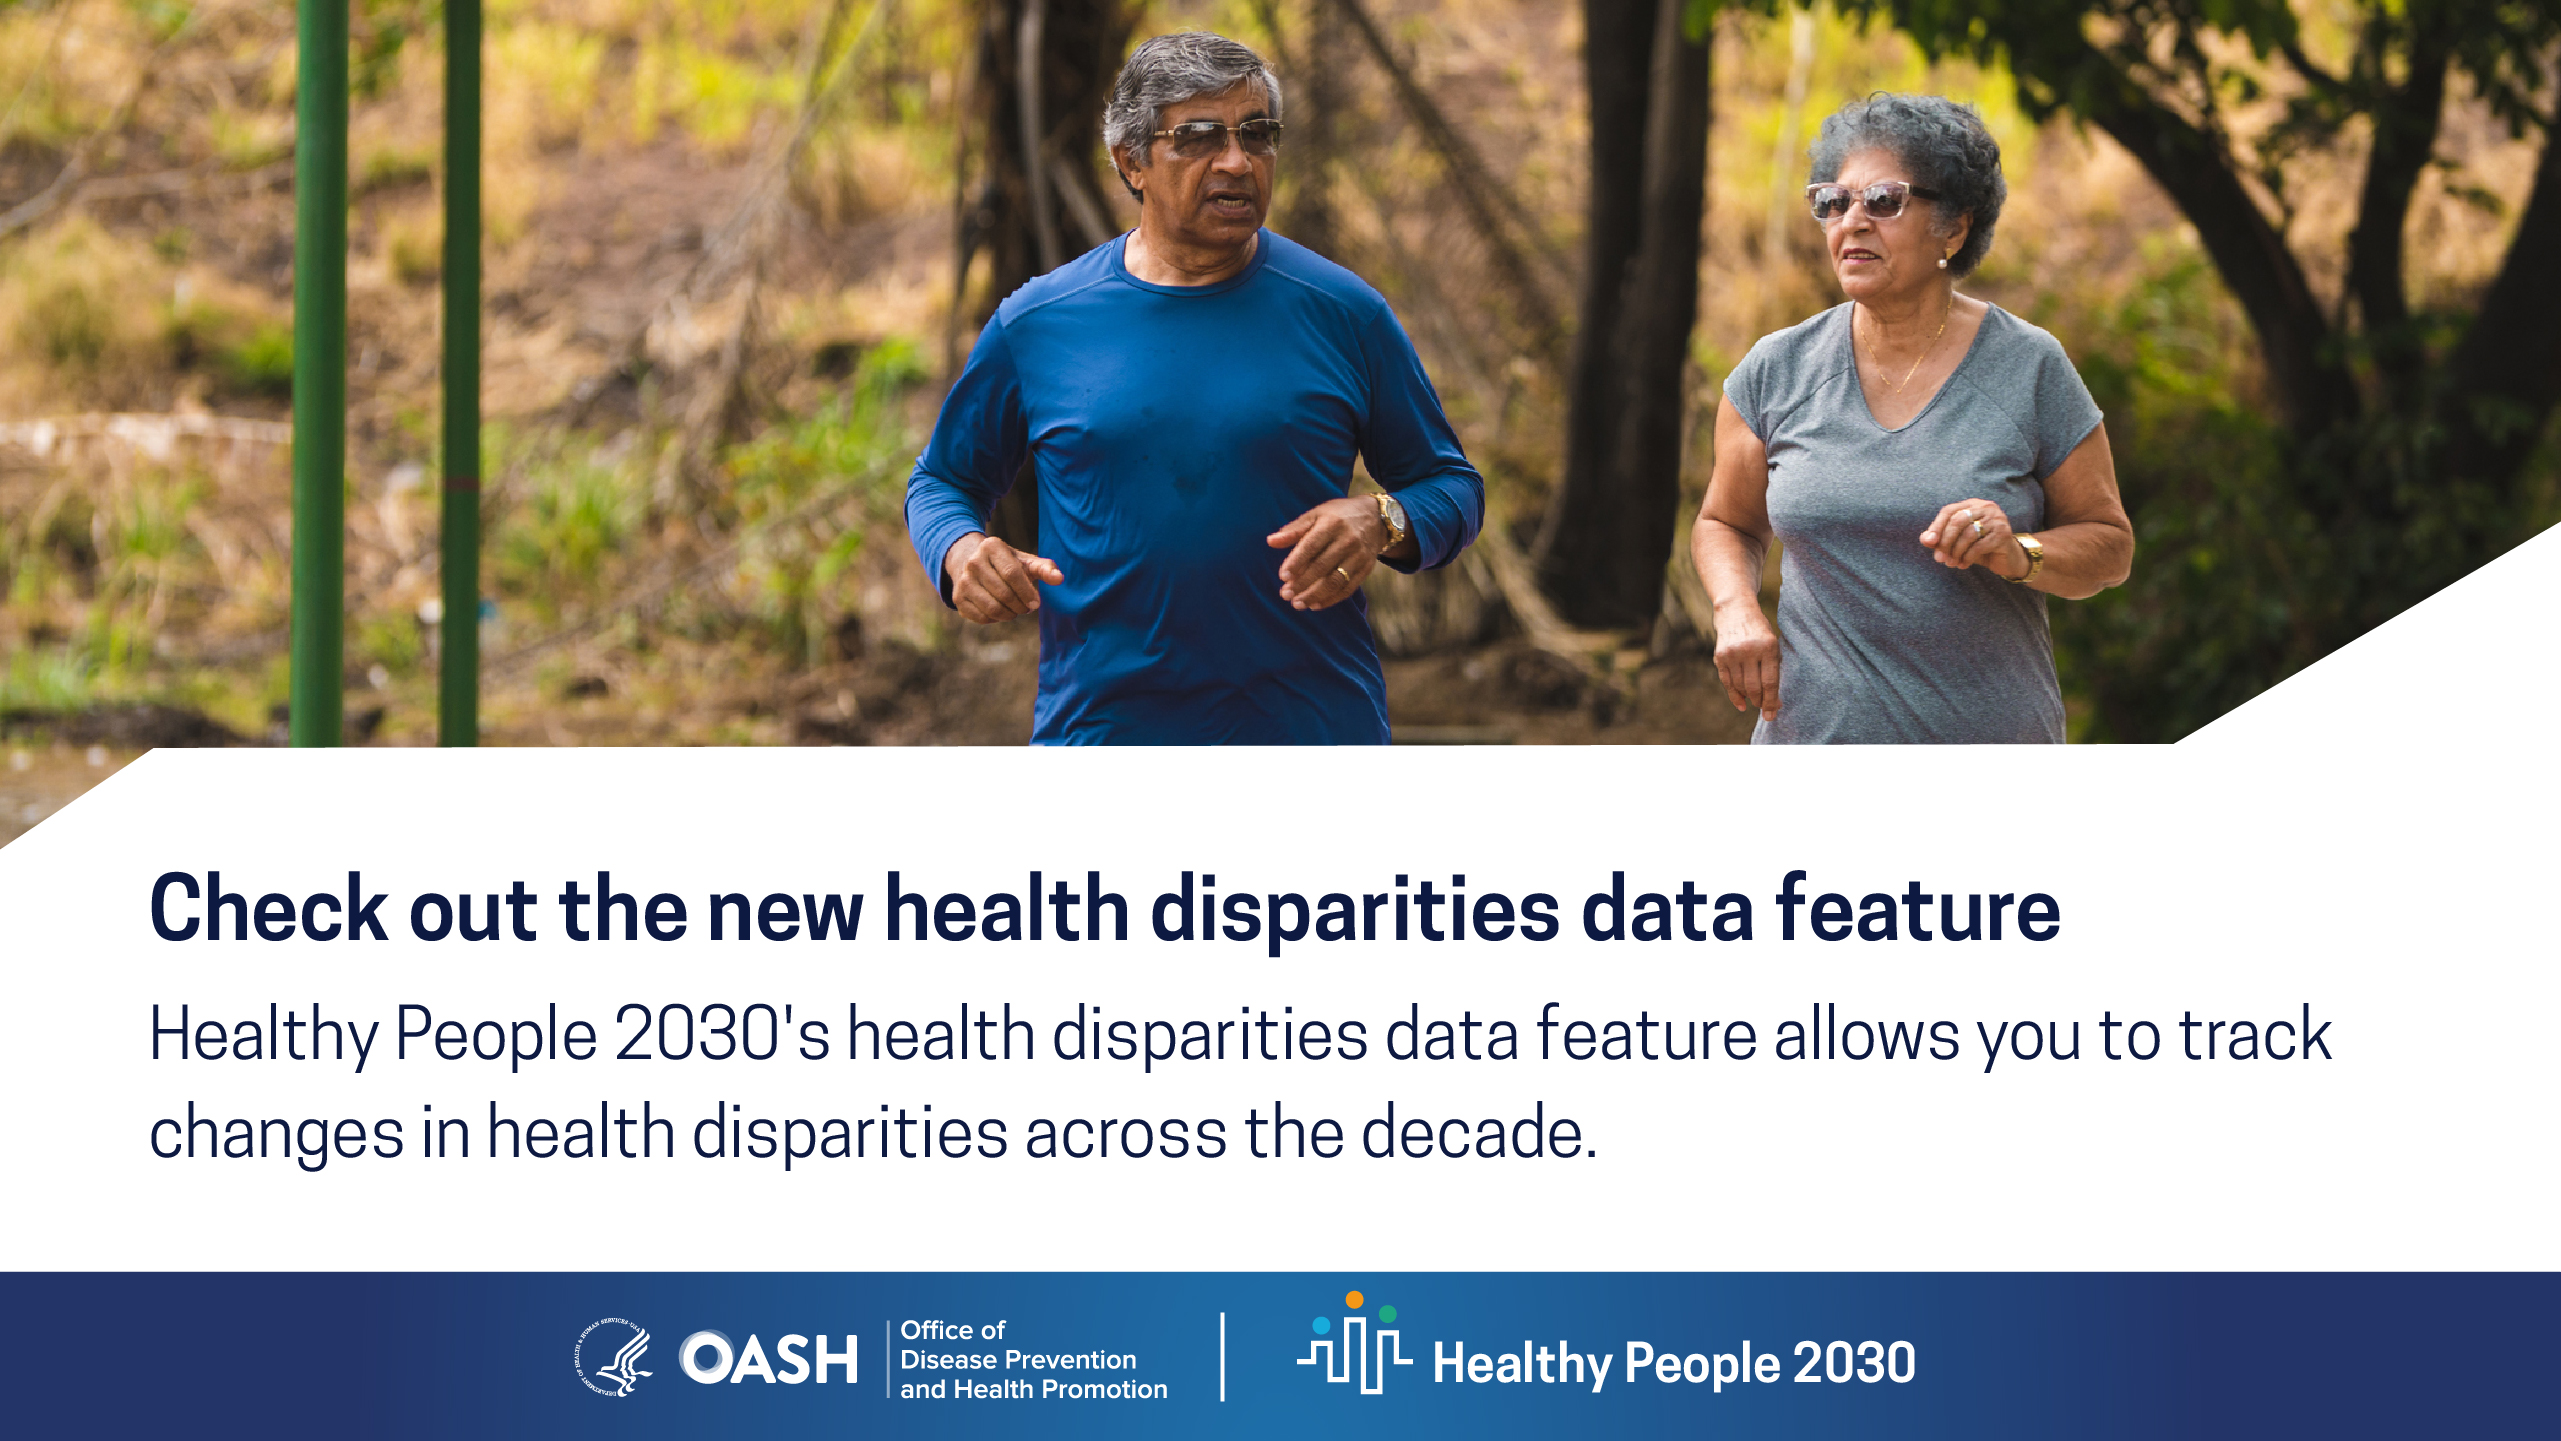 Two older adults, a man and woman with brown skin and graying hair, go for a jog in a wooded area. A message below them reads: "Check out the new health disparities data feature – Healthy People 2030's health disparities data feature allows you to track changes in health disparities across the decade."